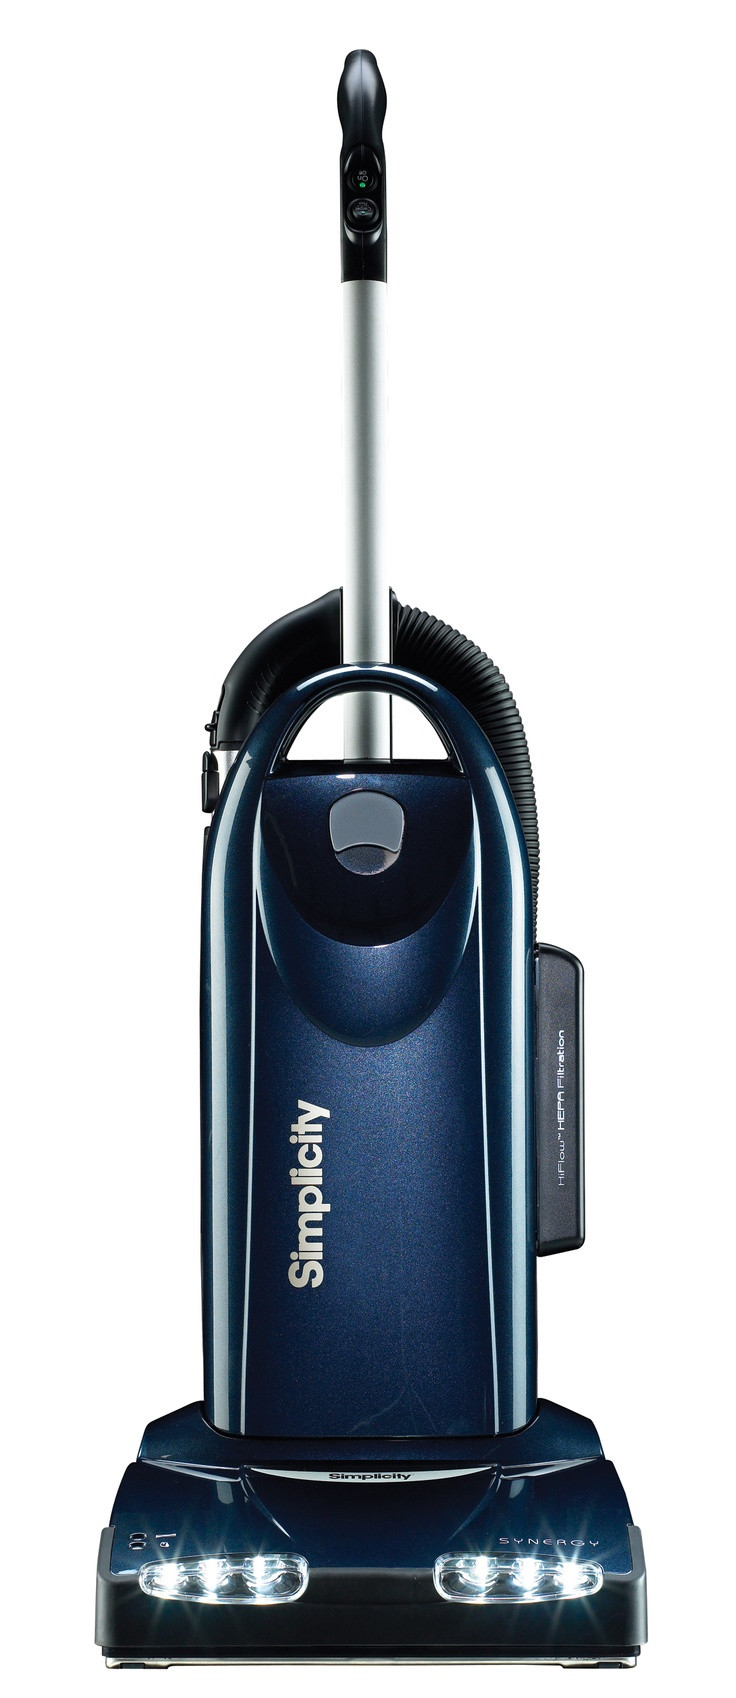 12 Ideal Miele Vacuum Cleaner for Hardwood Floors 2024 free download miele vacuum cleaner for hardwood floors of 18 best cool products images on pinterest vacuum cleaners with regard to saving good people from bad vacuums simplicity vacuum saving good people 